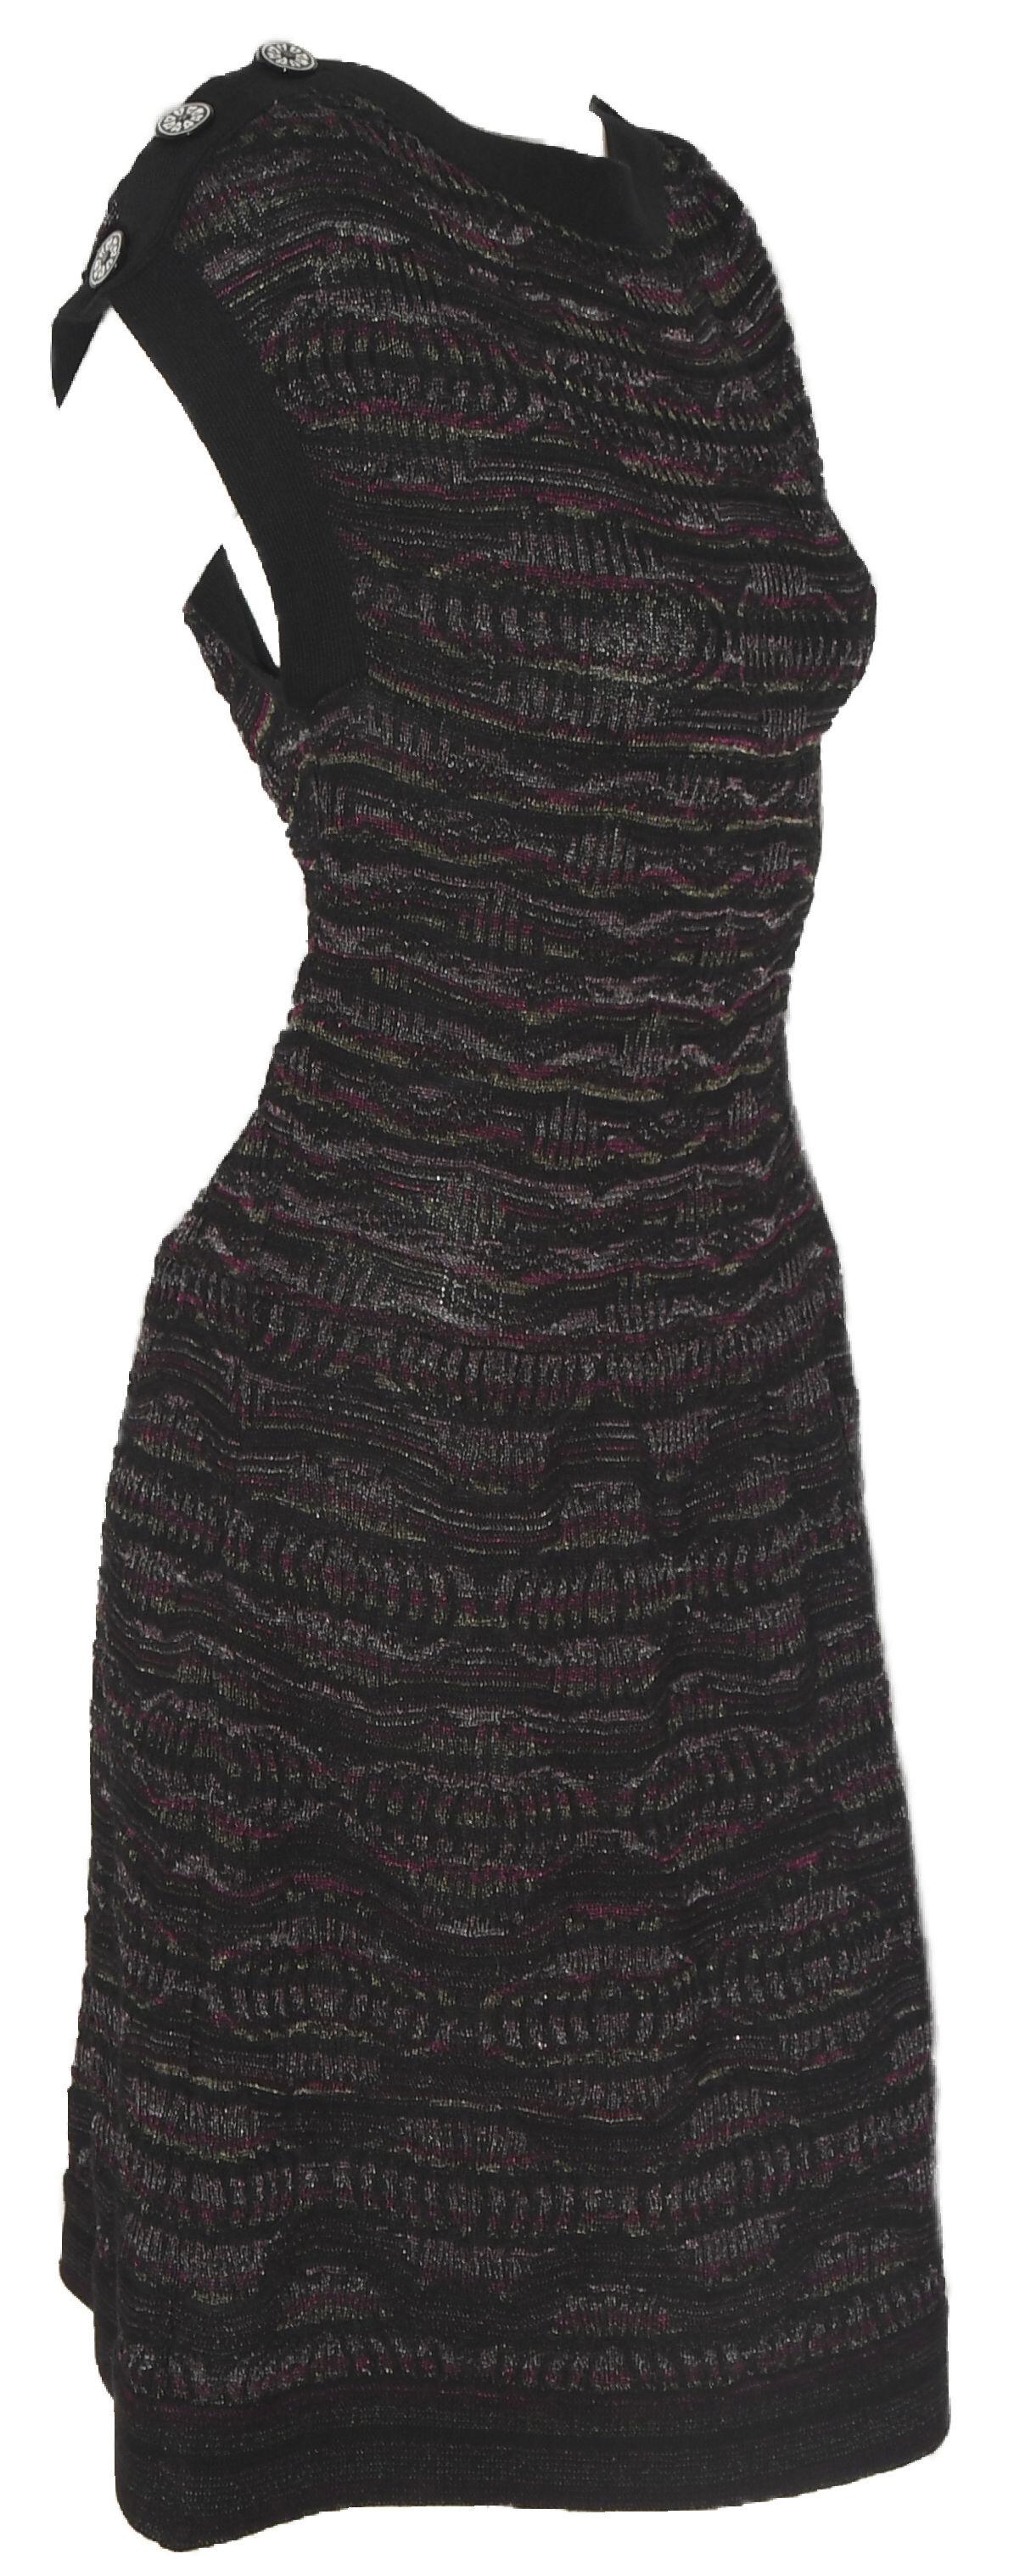 Chanel textured knit sleeveless dress incorporates black, purple, pink and silver threads throughout.  Dress is ribbed in black trim on sleeve and shoulders with 3 Chanel buttons on each shoulder.  With a slight drop waist and gathered skirt, this